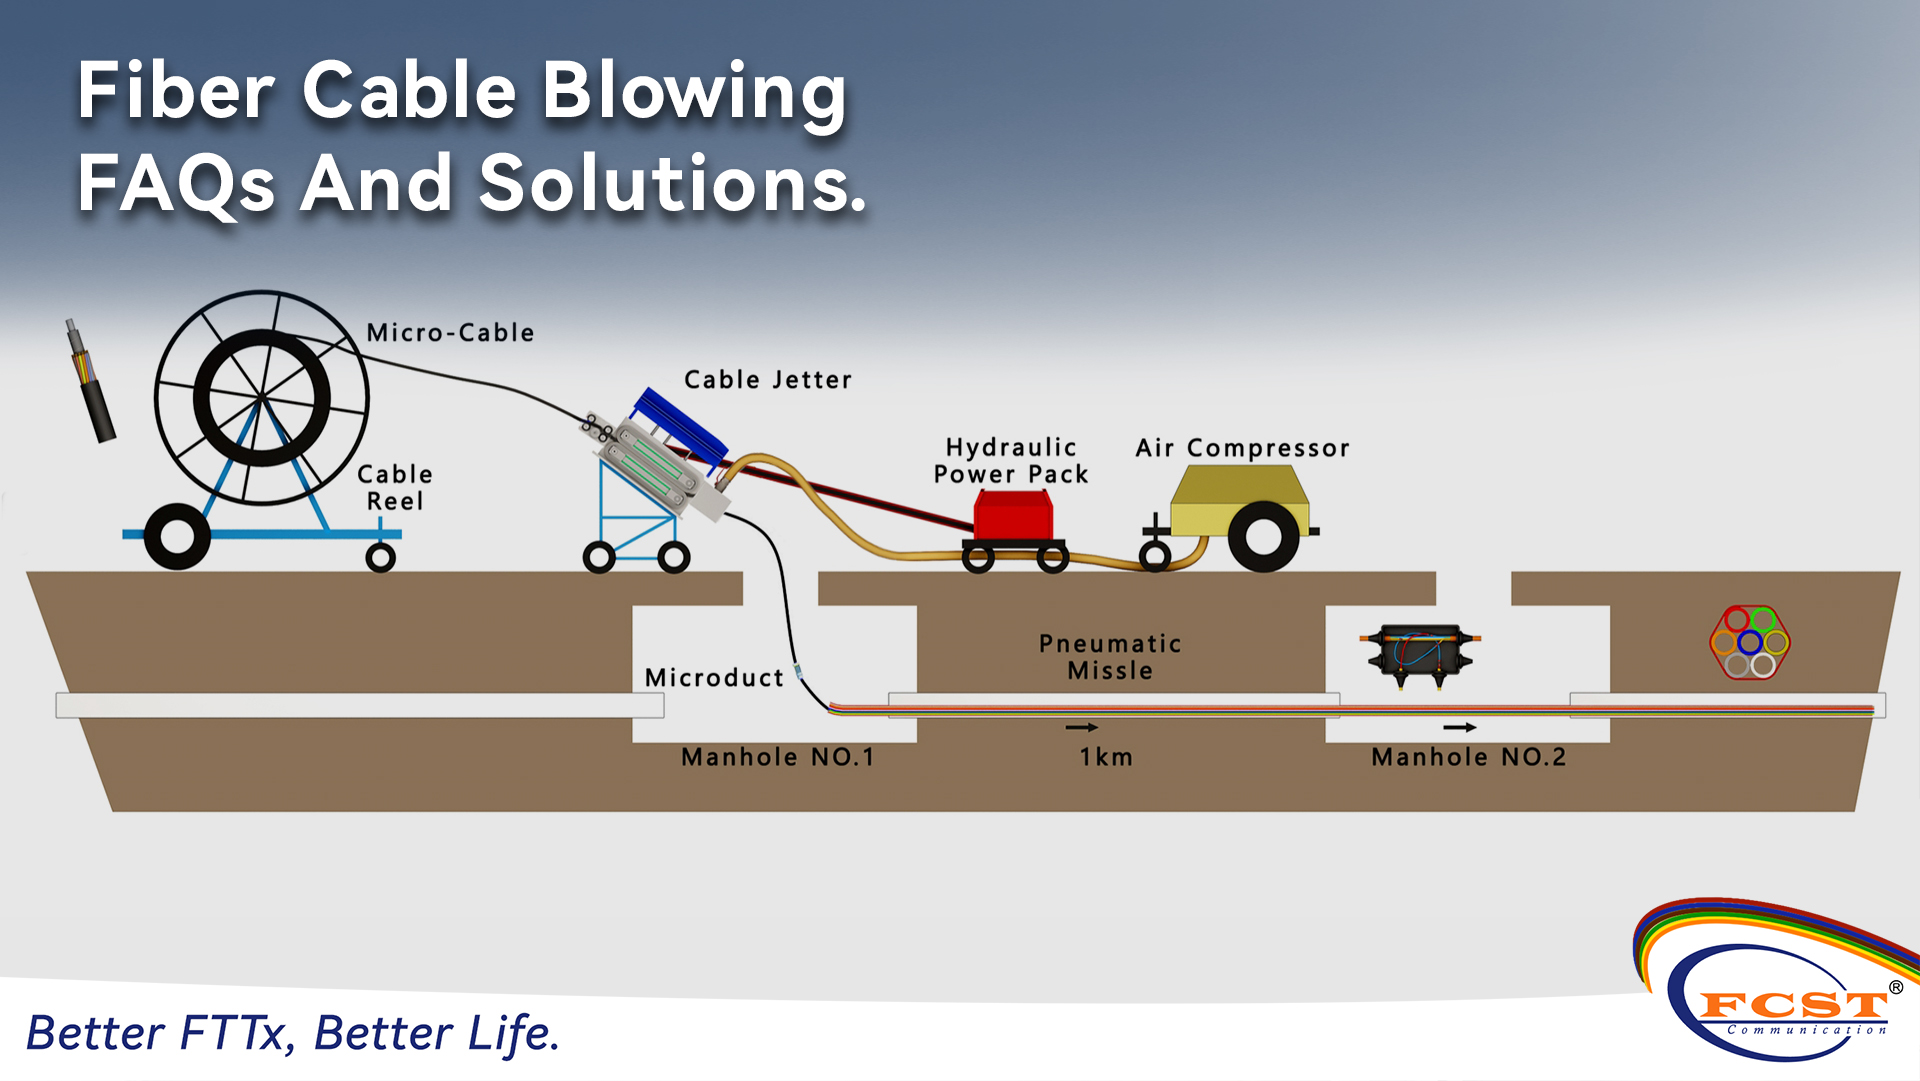 Fiber Cable Blowing FAQs And Solutions